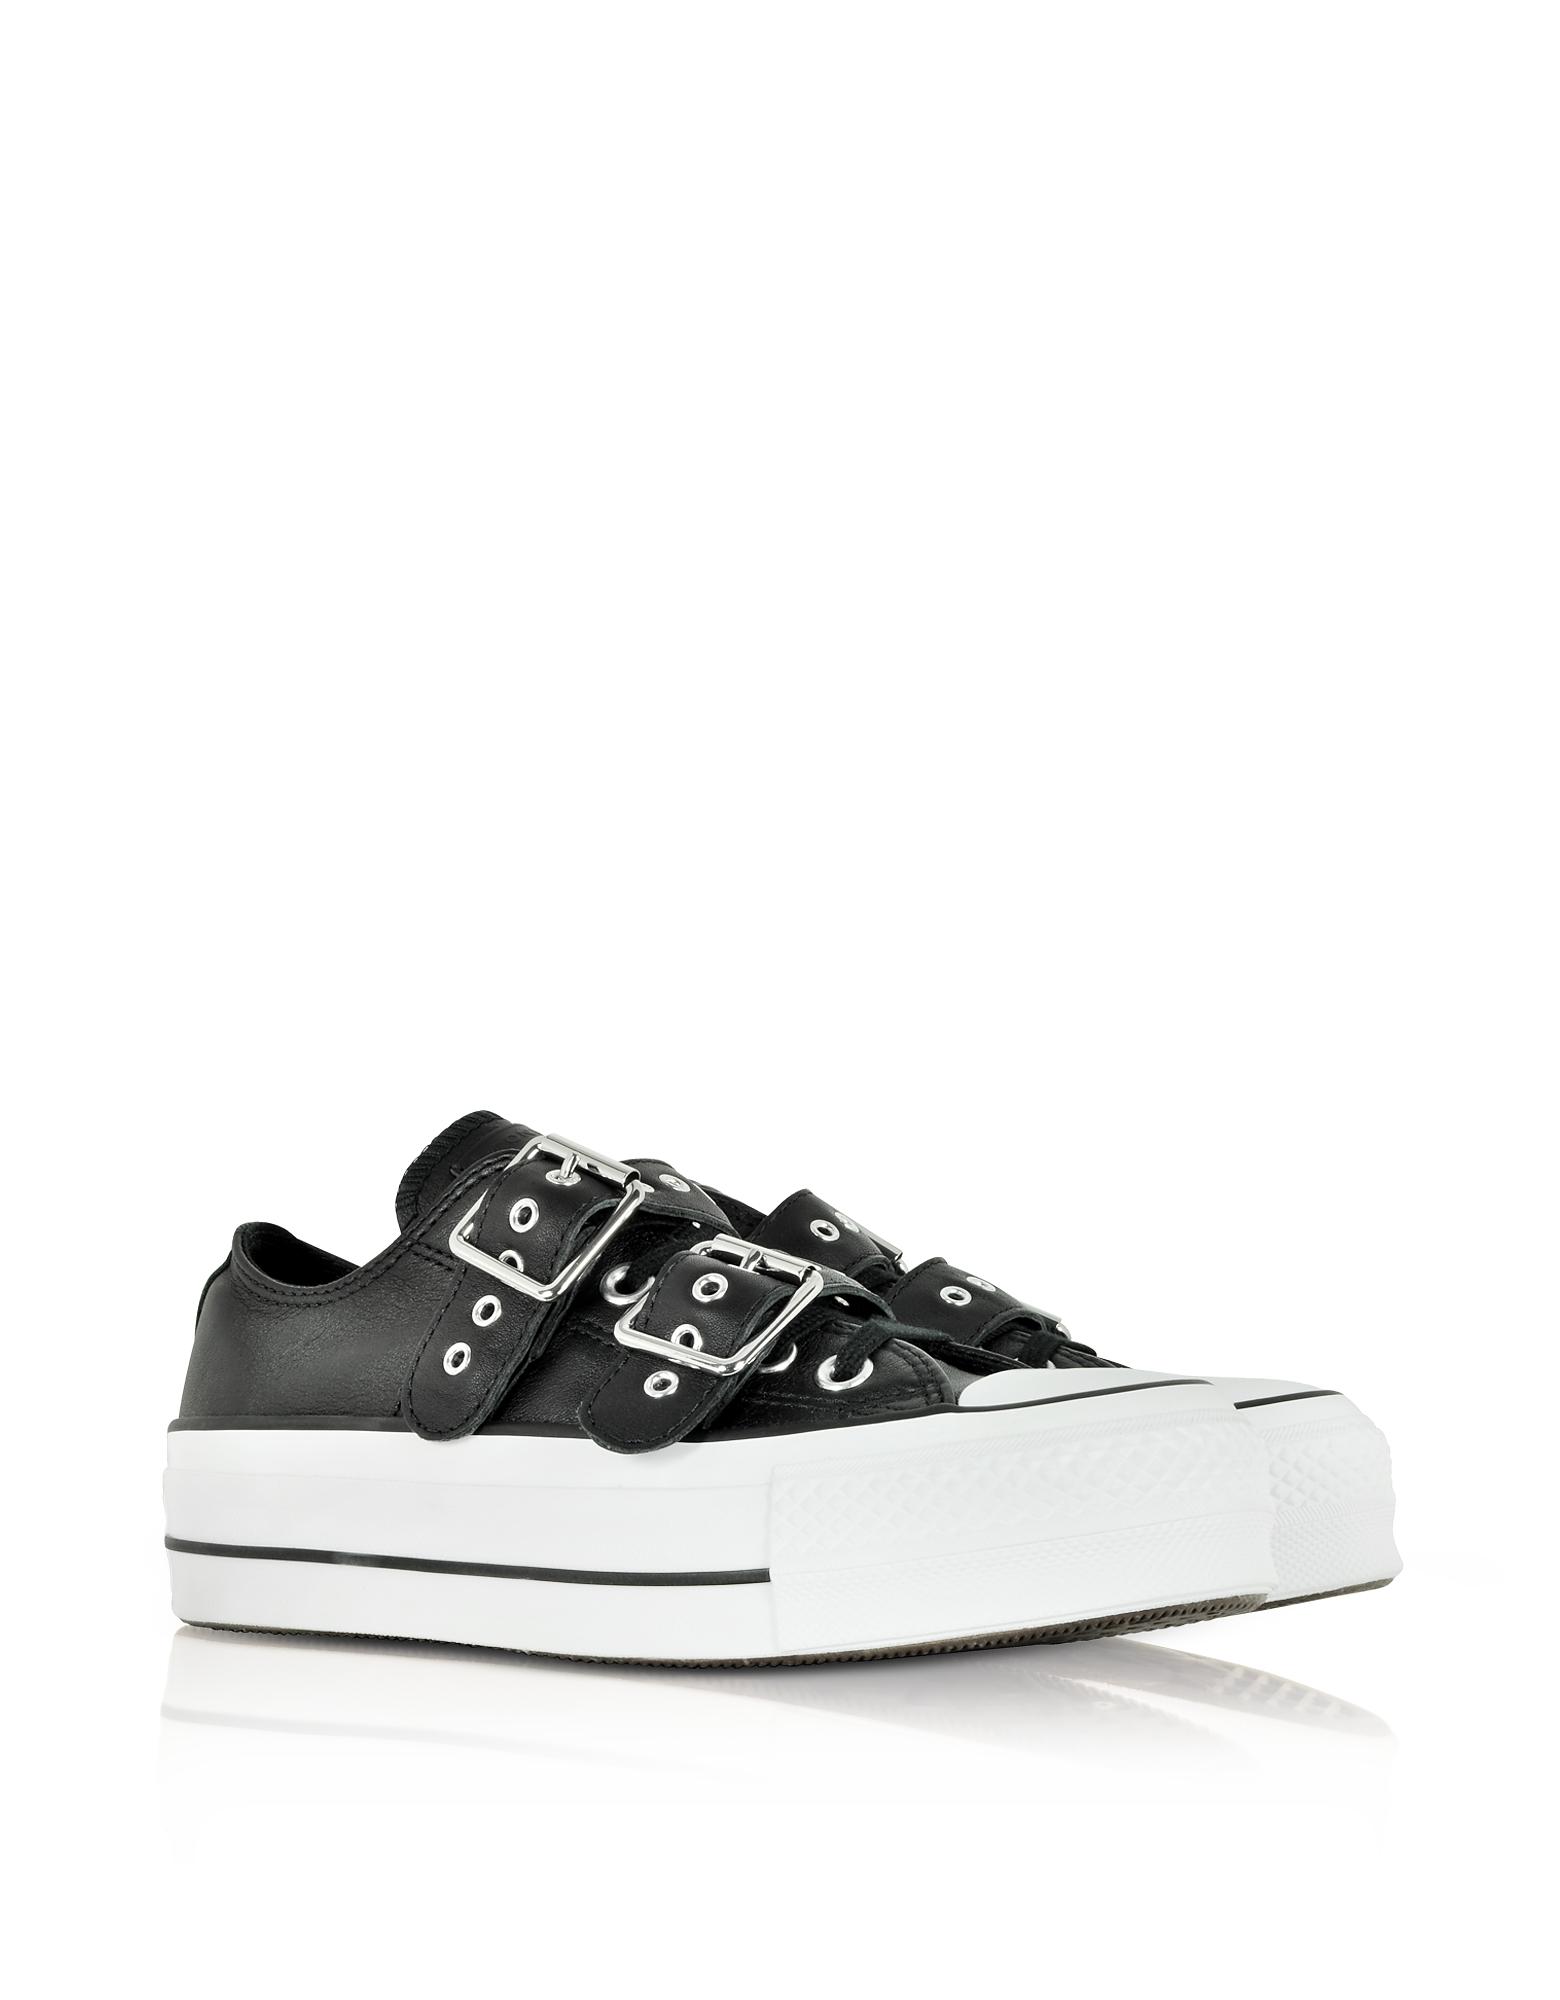 converse chuck taylor all star leather buckle low top